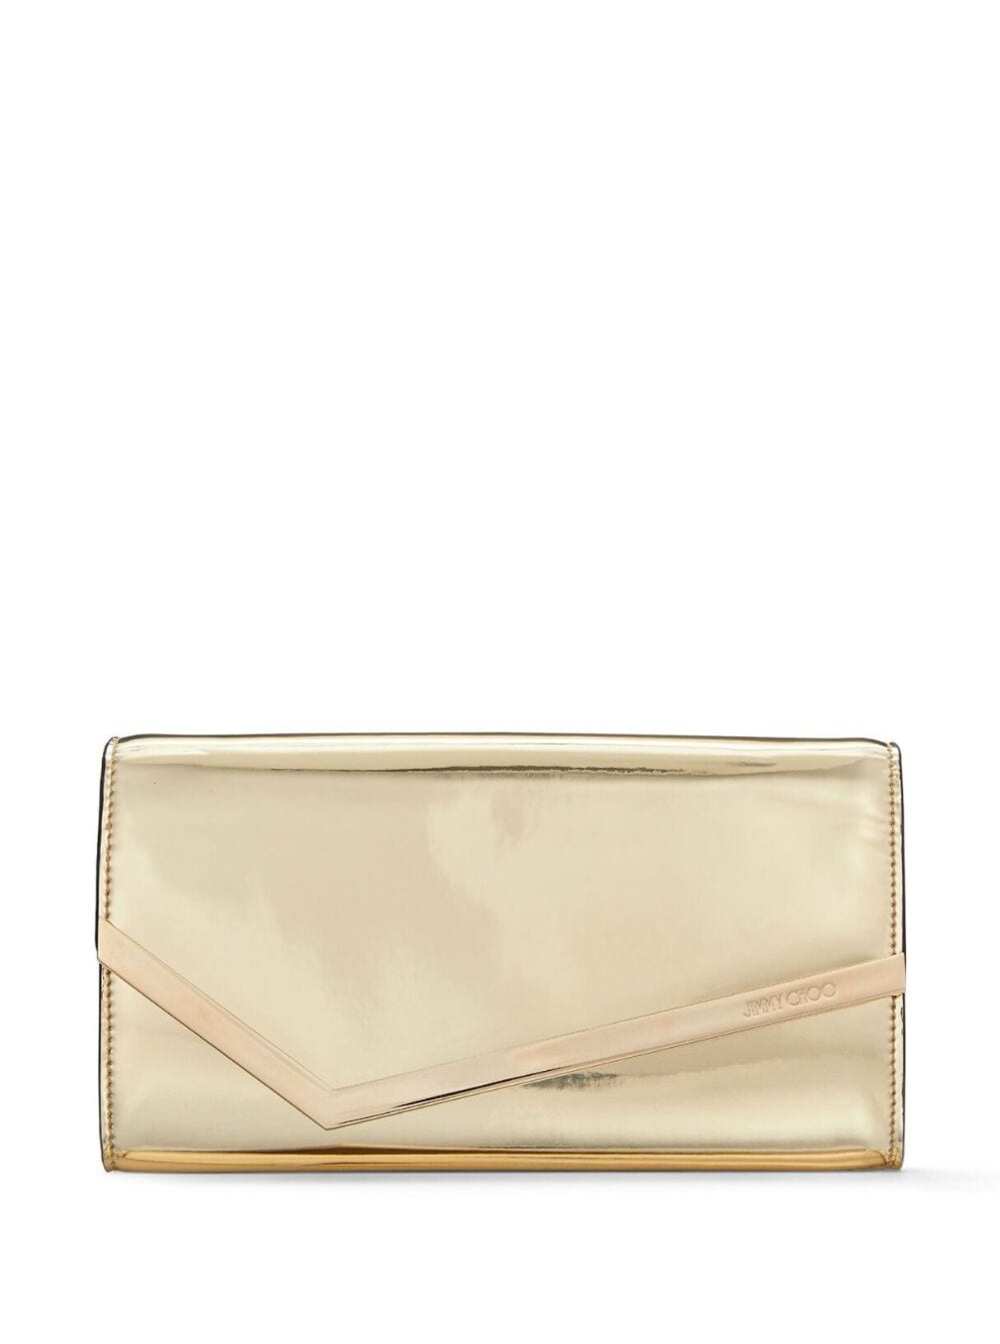 JIMMY CHOO EMMIE GOLD-COLORED HANDBAG WITH MAGNETIC FASTENING IN MIRROR FABRIC WOMAN